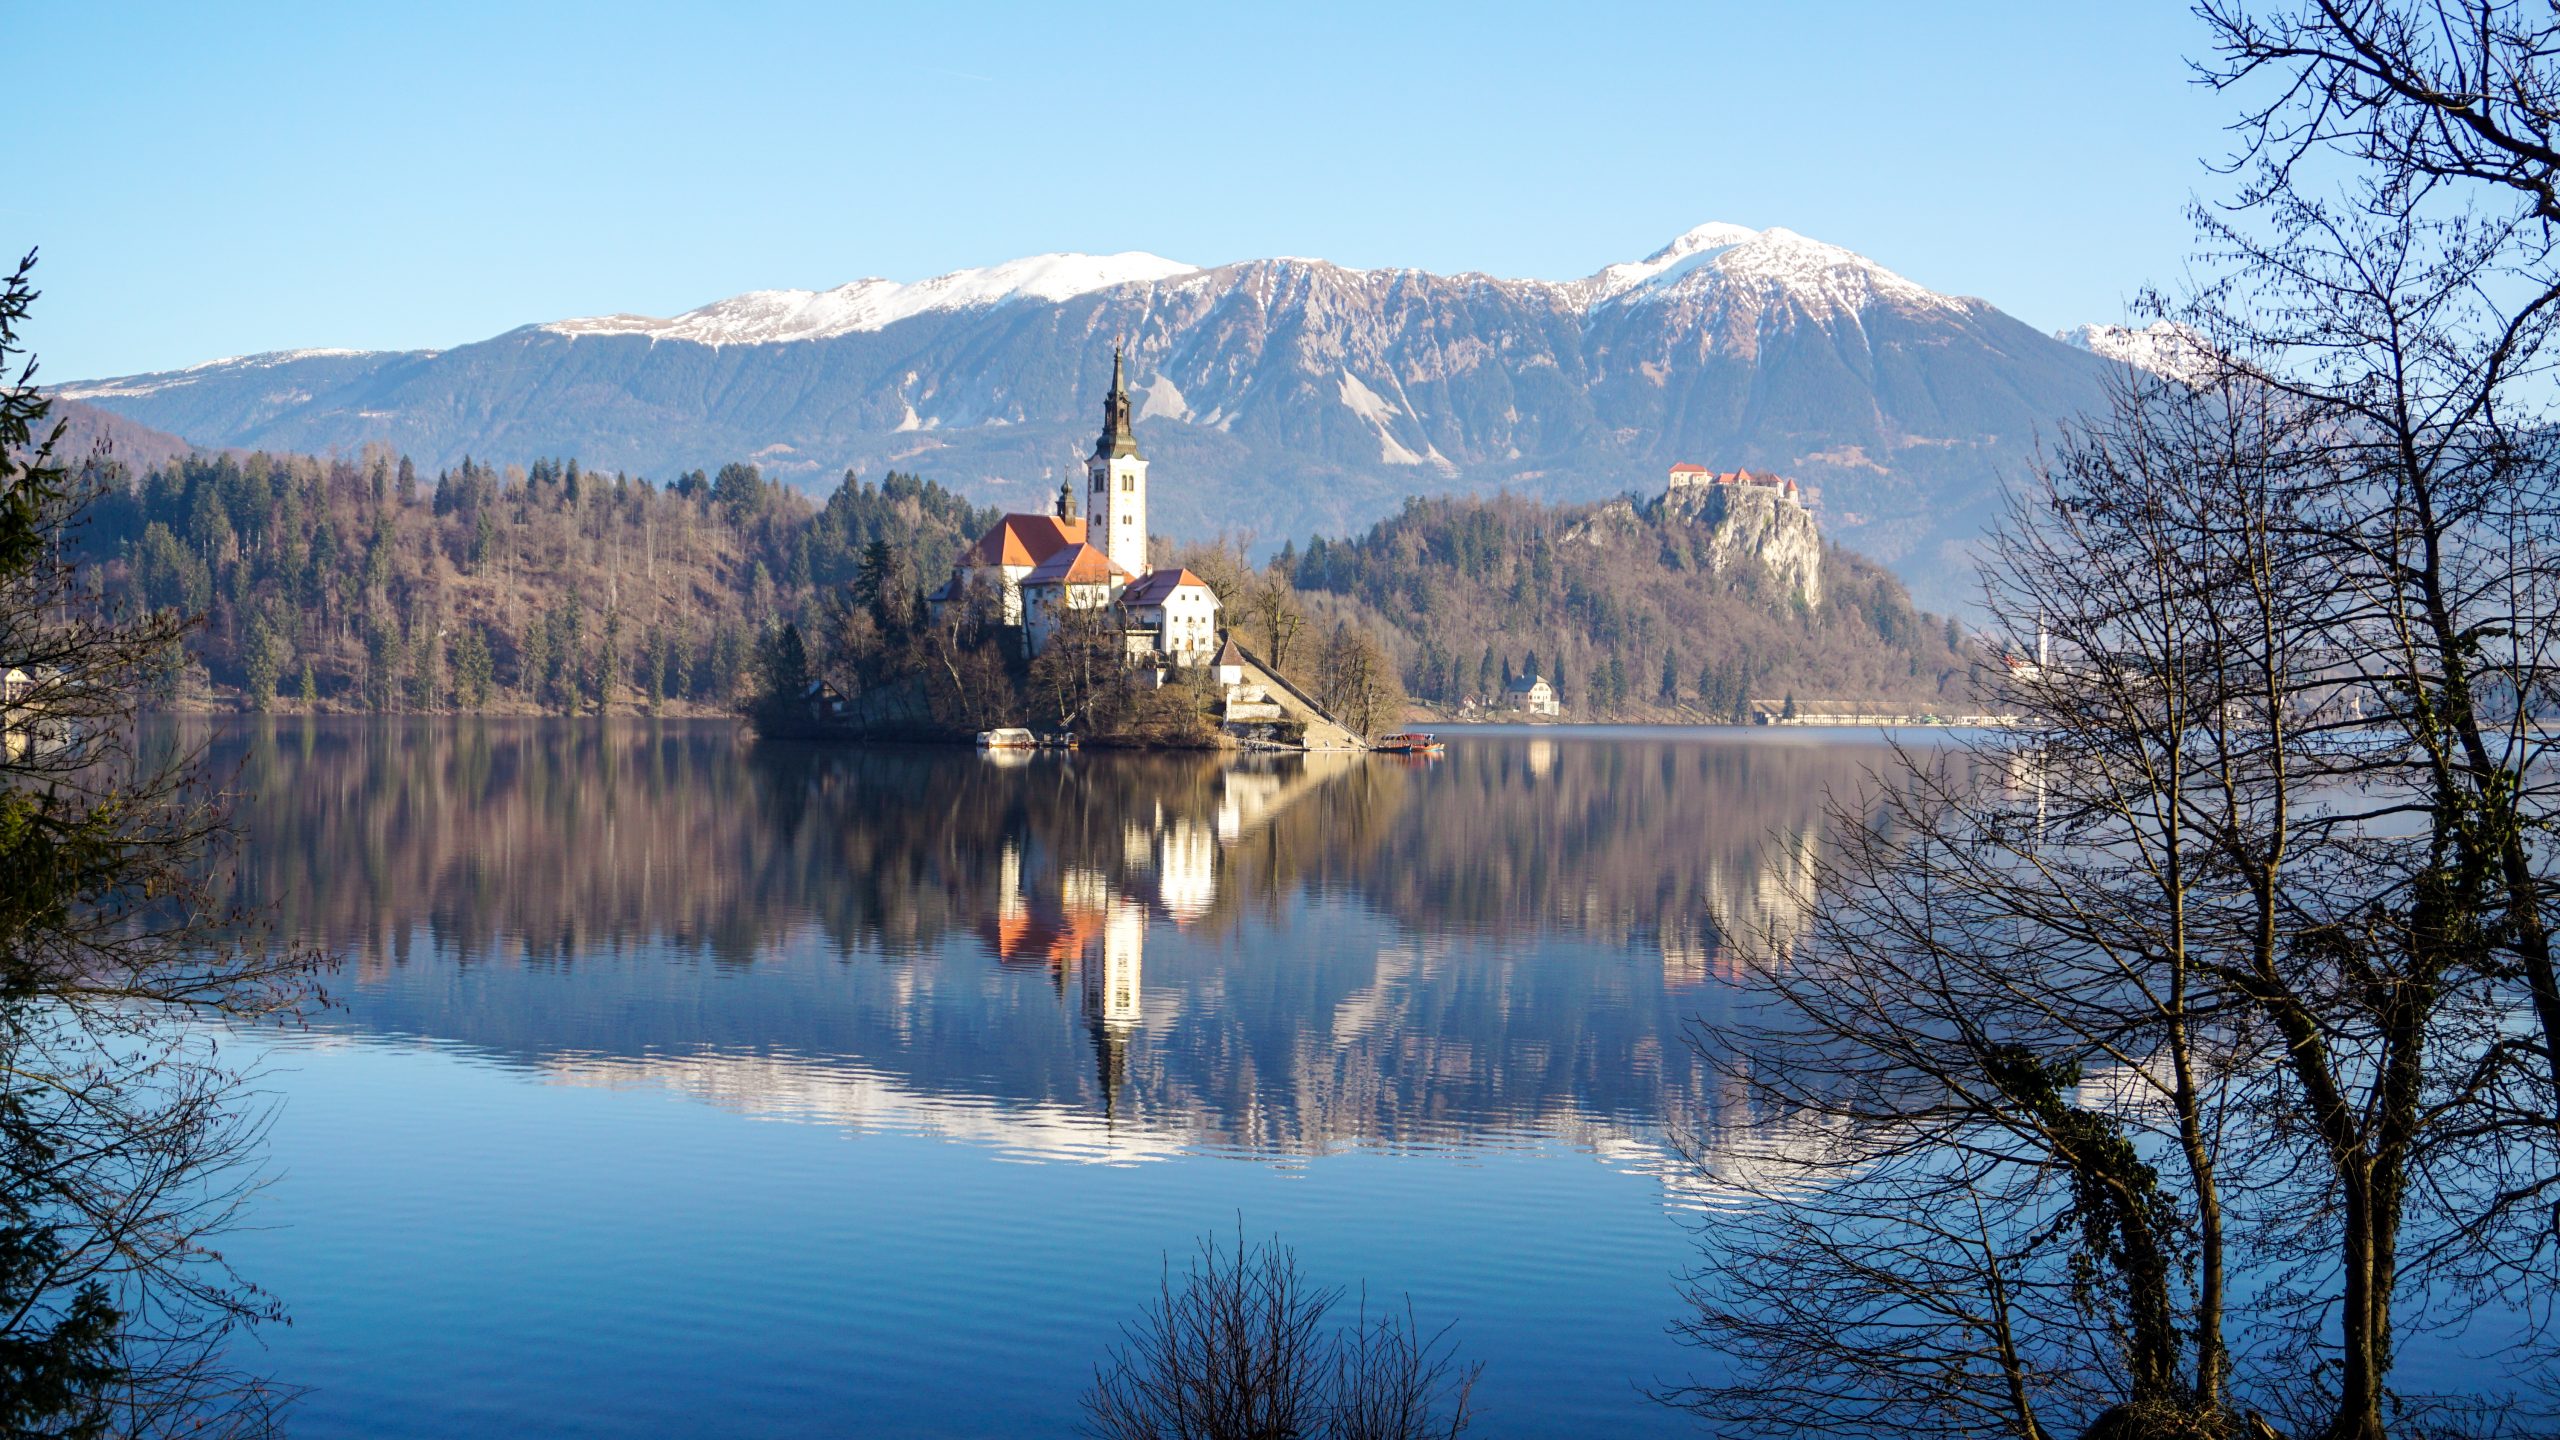 View of Bled Island and Bled Castle